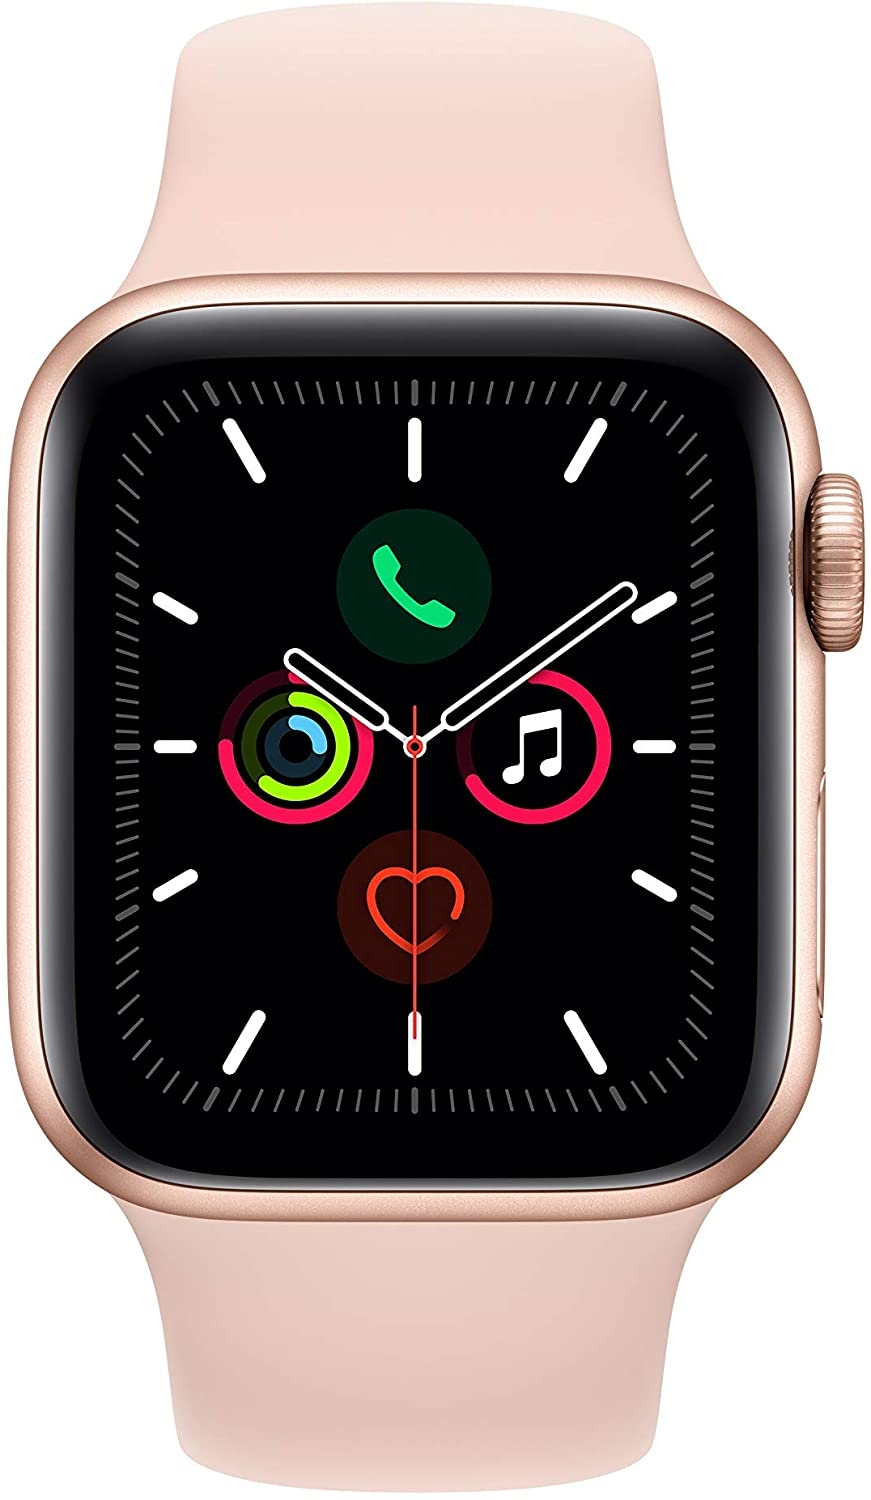 thumbnail 3 - Apple Watch Series 5 40mm 44mm - GPS Only or GPS + Cellular - Various colors